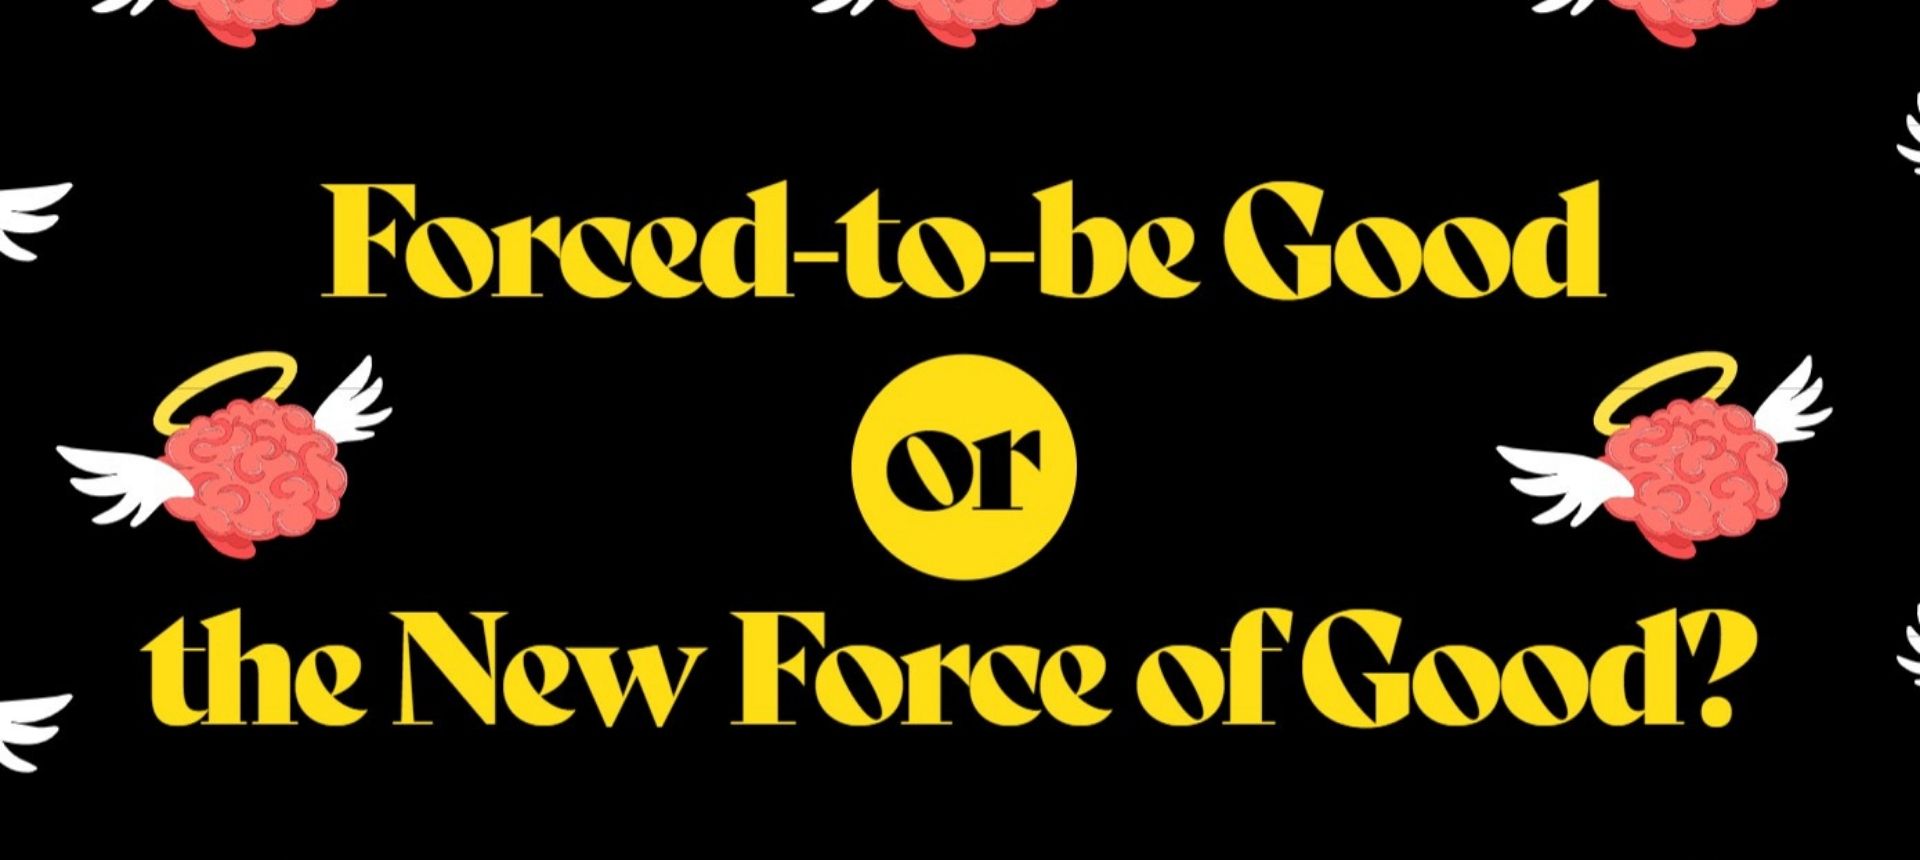 The New Force of Good